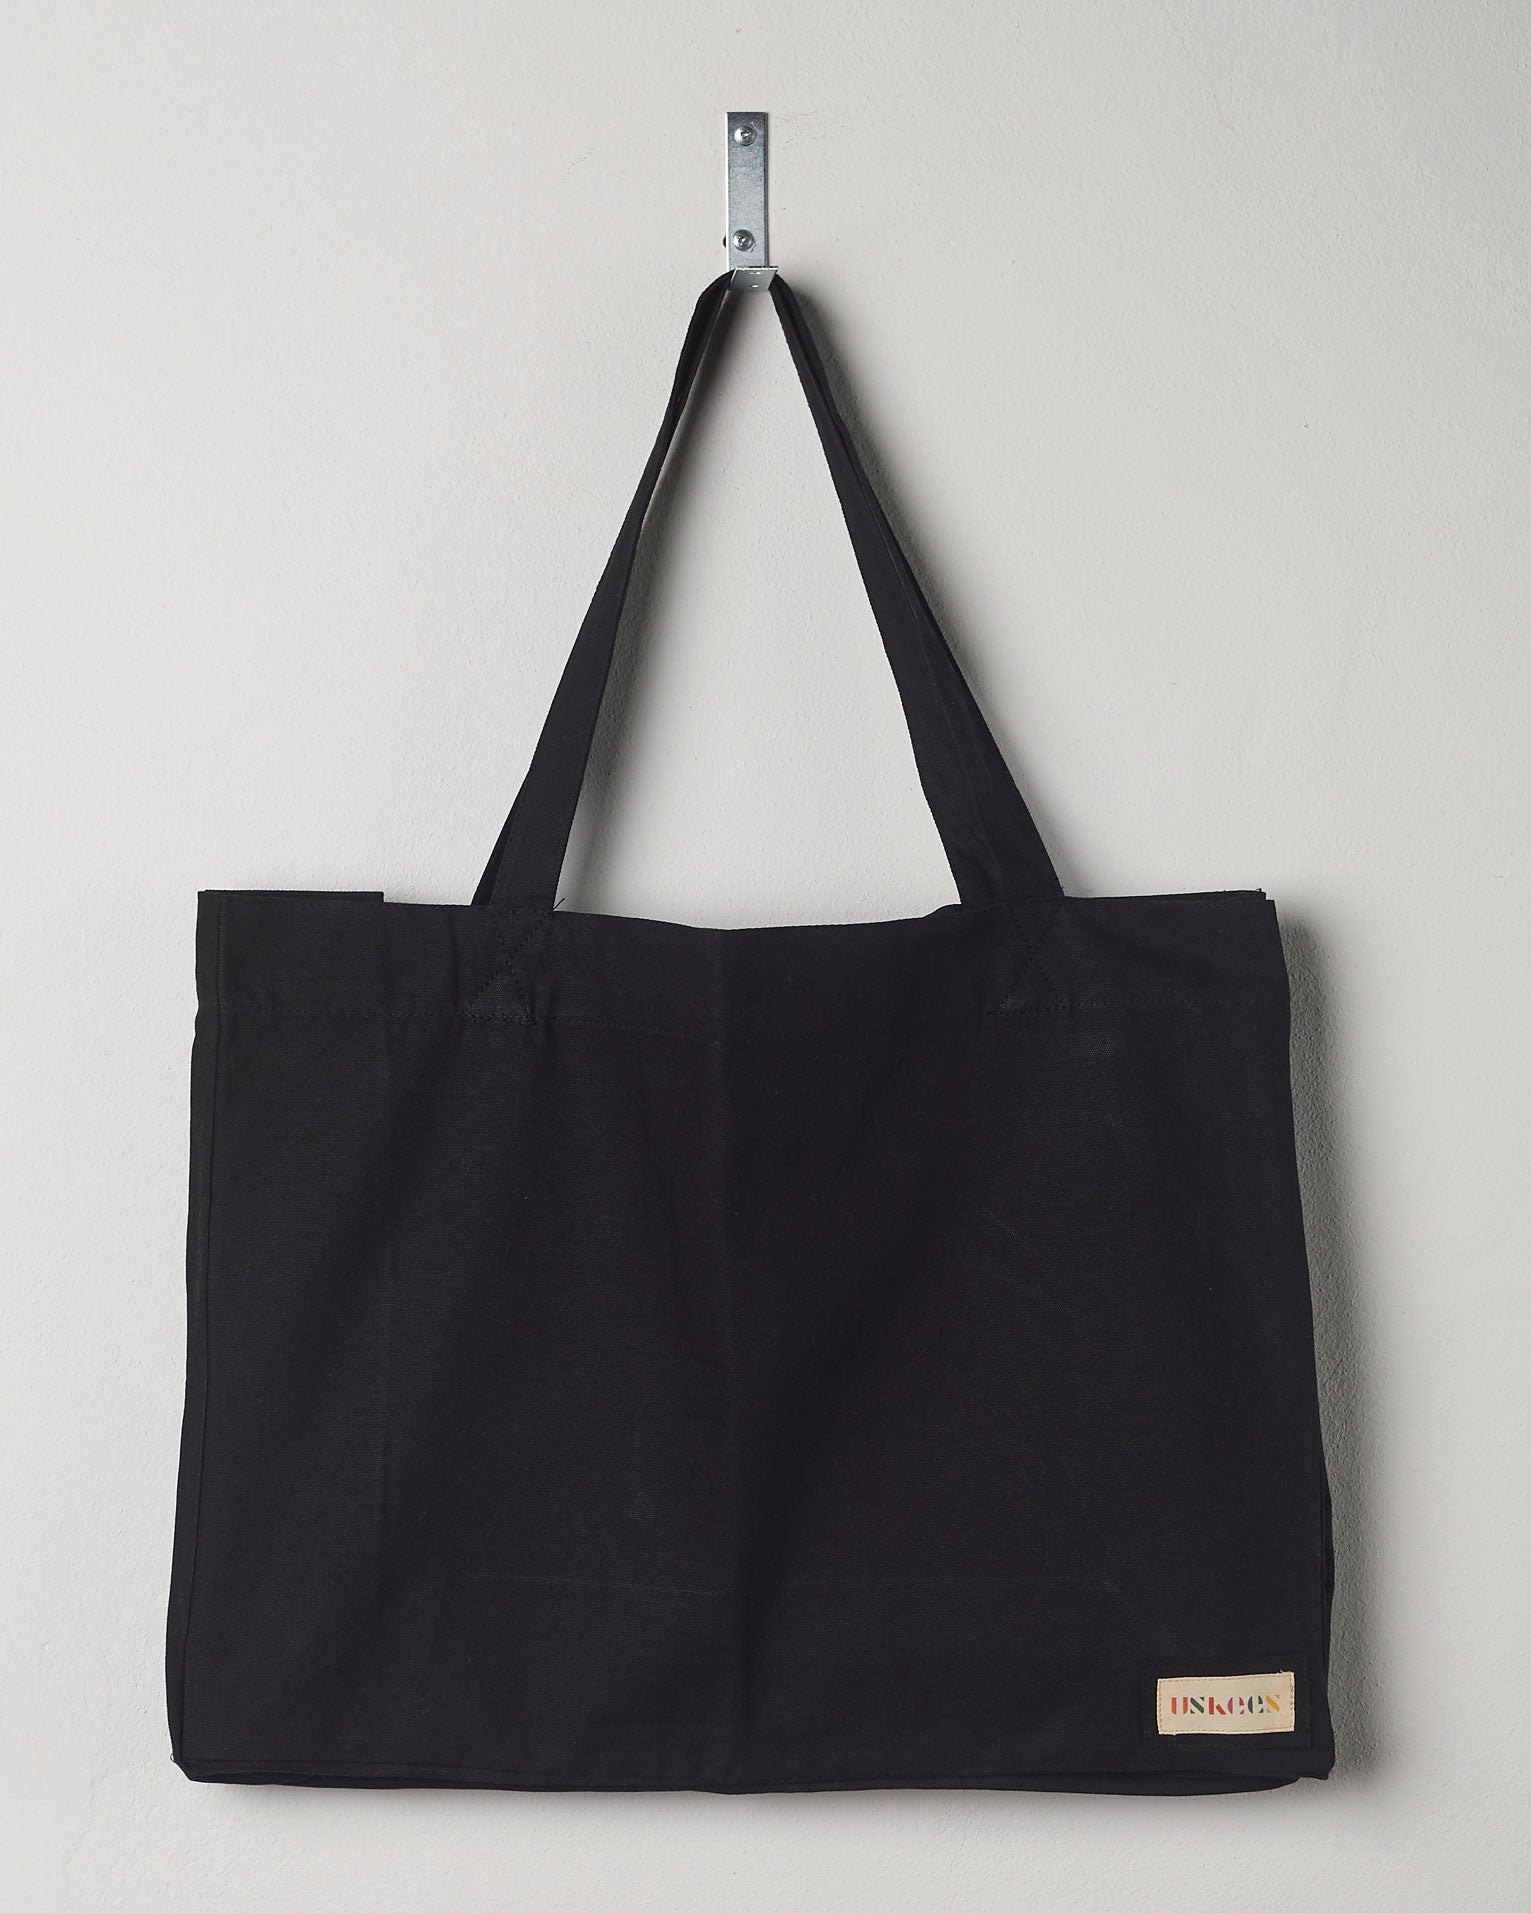 Full front hanging shot of Uskees #4001, large black tote bag, showing double handles and Uskees woven logo. 